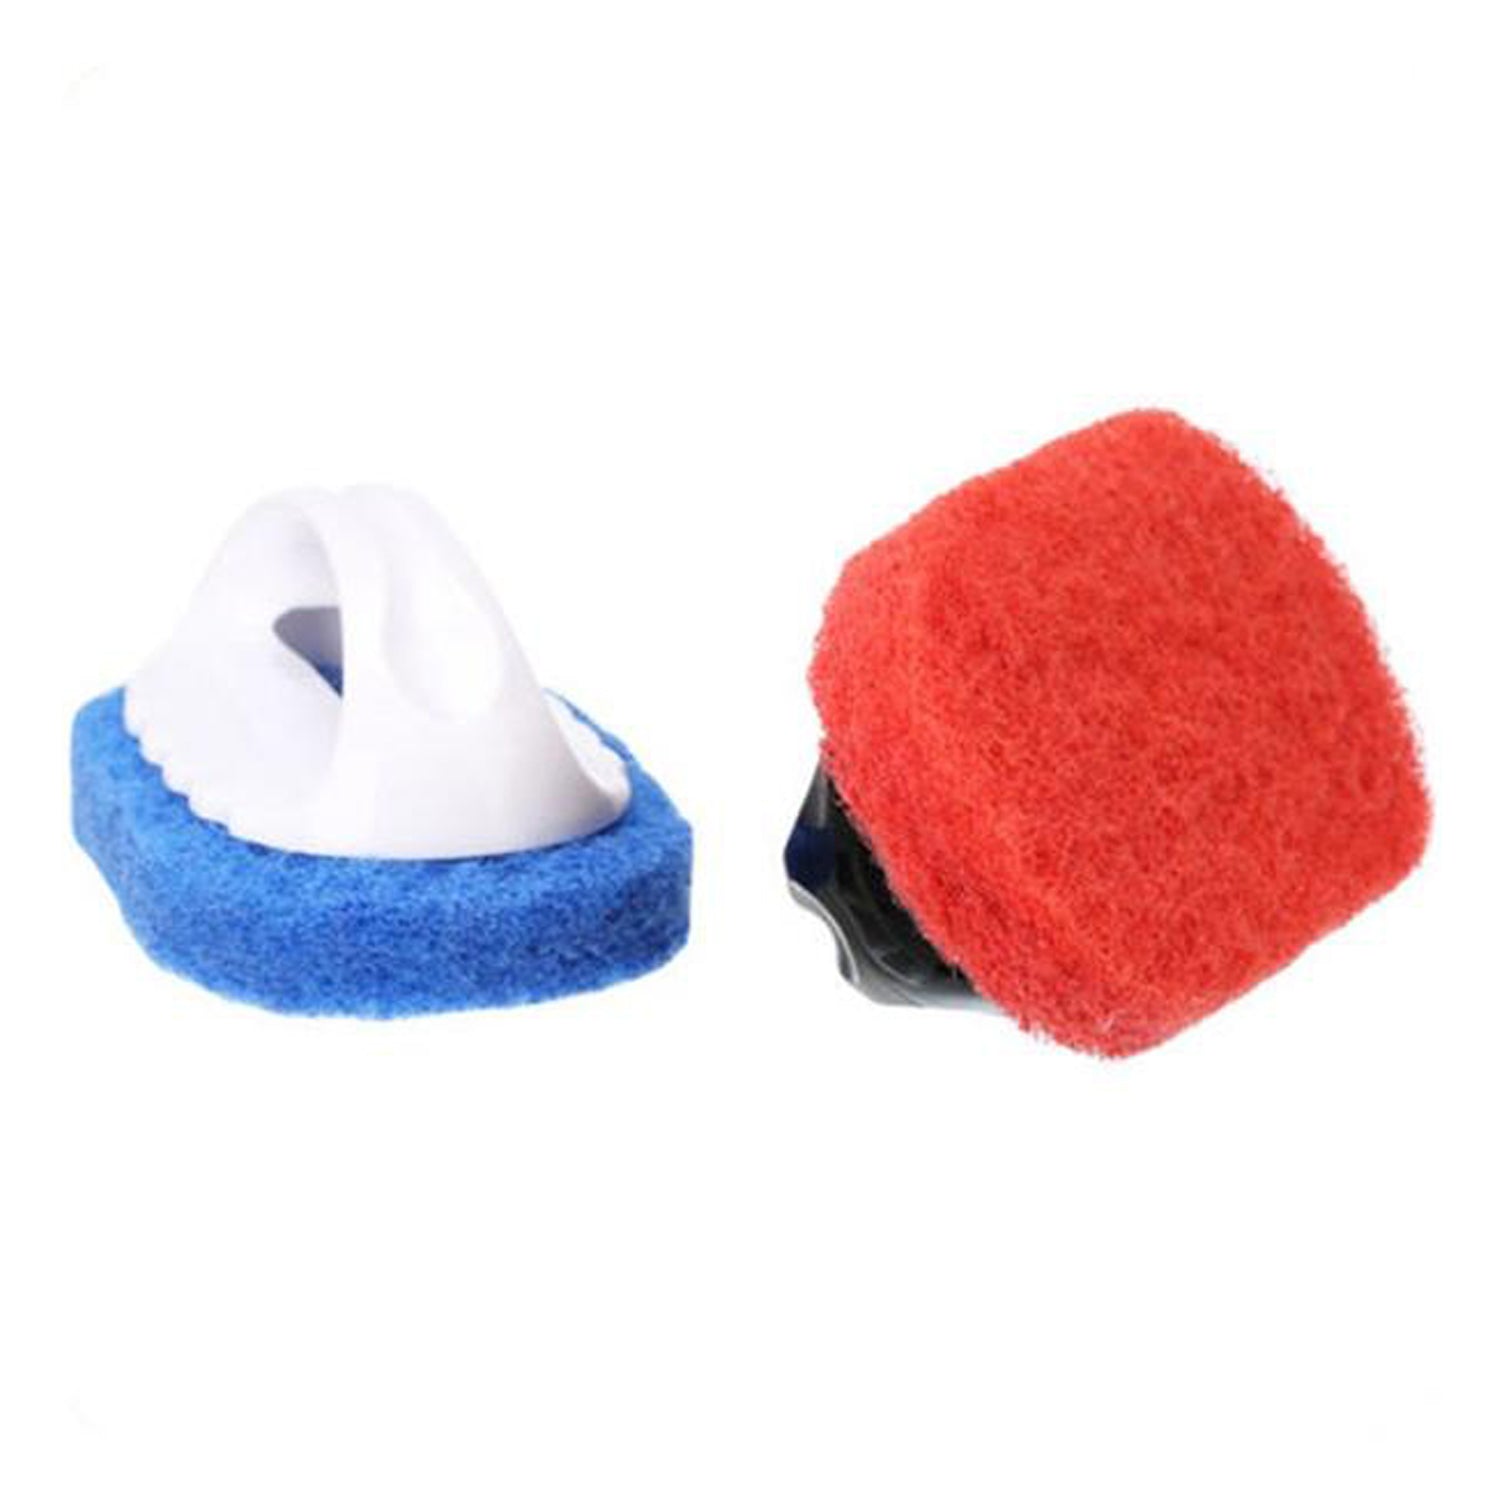 6145 Bath Cleaning Brush used for cleaning and washing of types of surfaces in bathroom, kitchen etc.